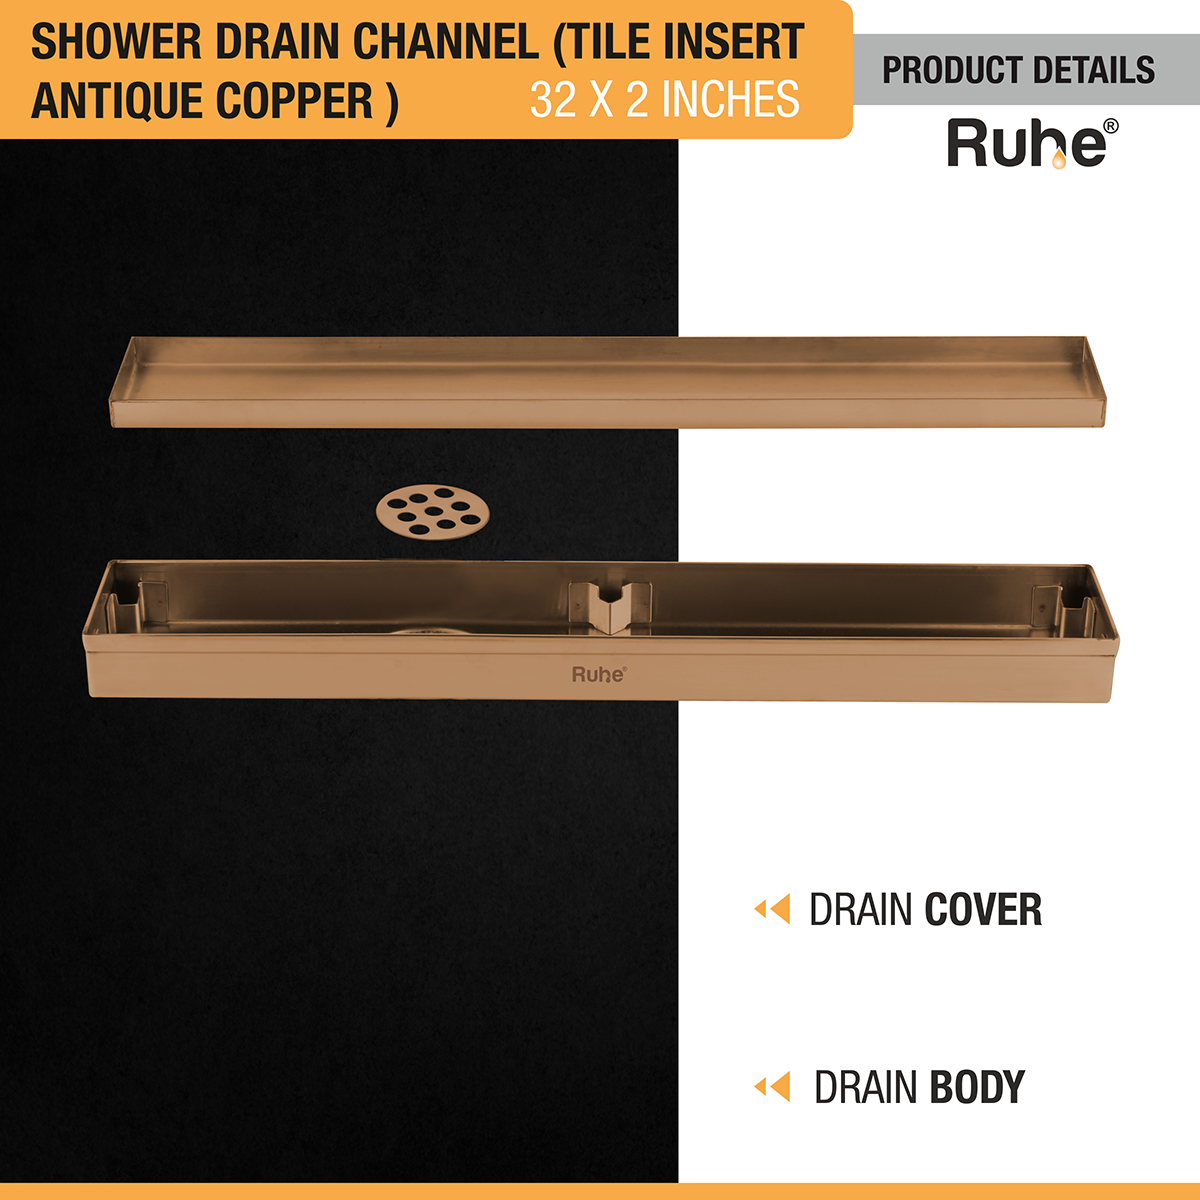 Marble Insert Shower Drain Channel (32 x 2 Inches) ROSE GOLD PVD Coated with drain cover and drain body